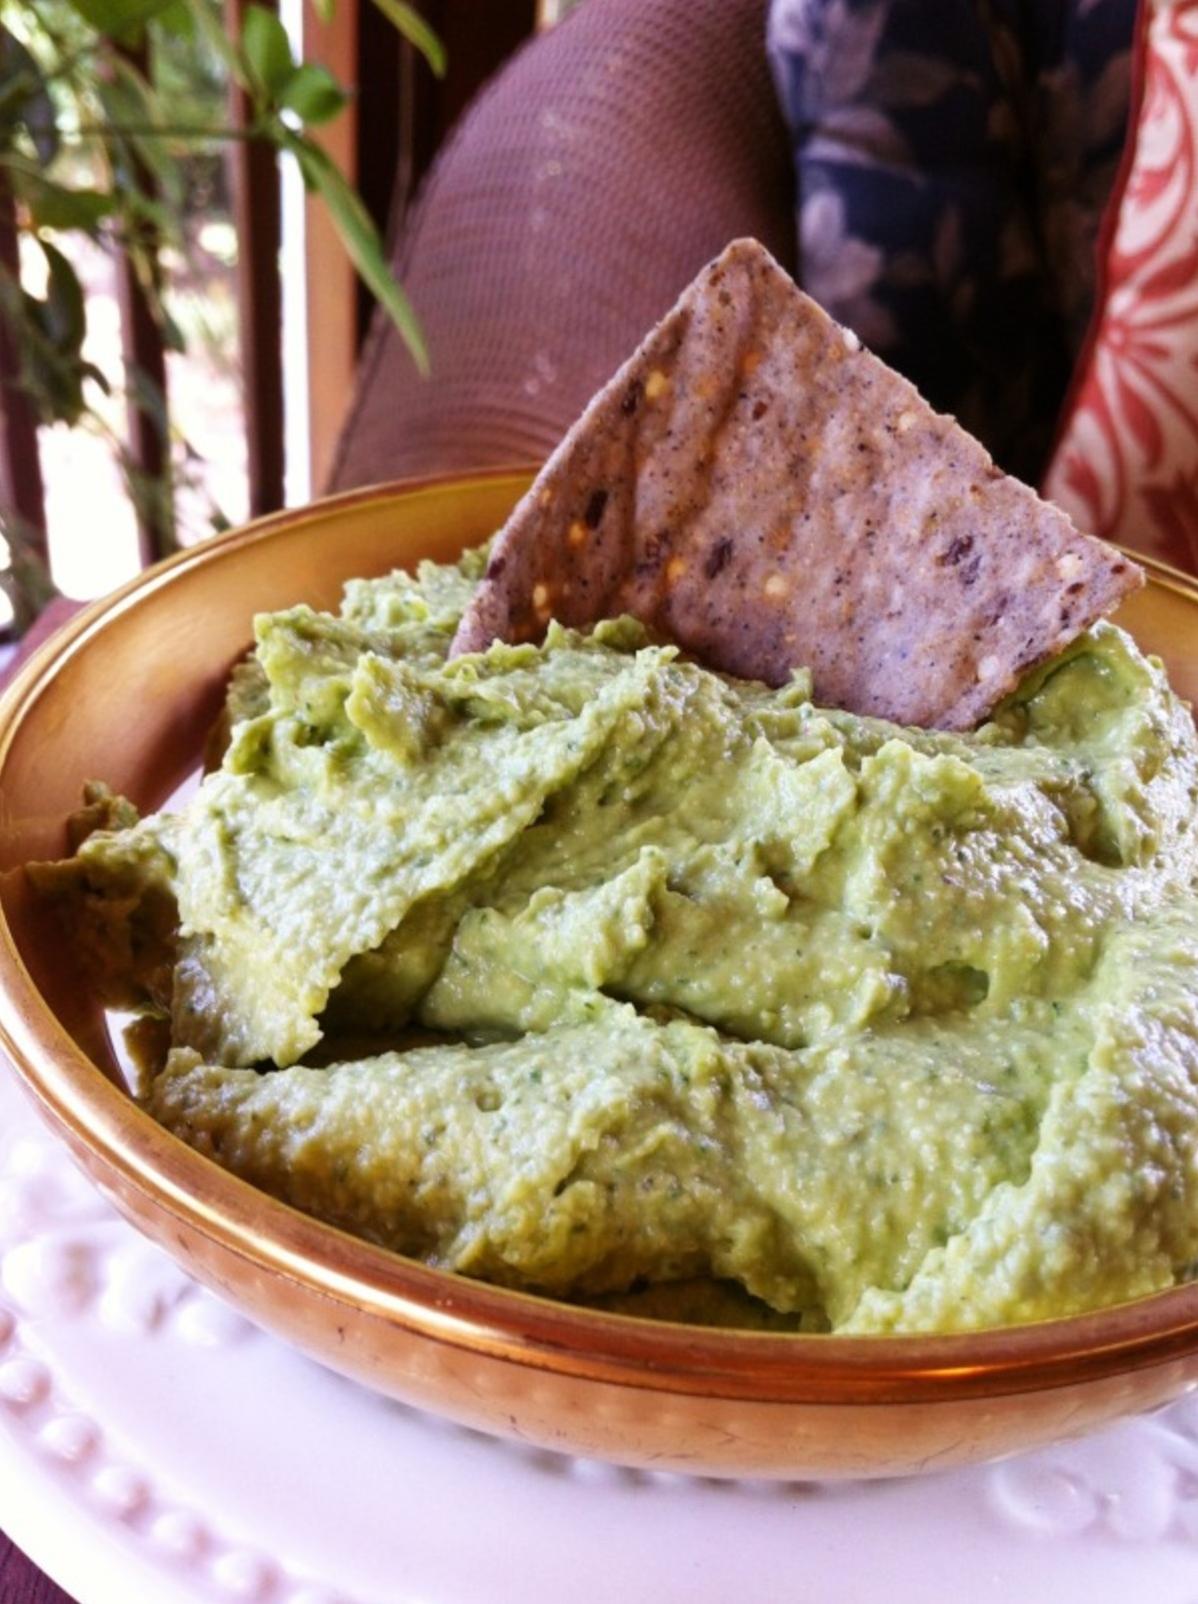  We've added some green goodness to the classic chickpea hummus.